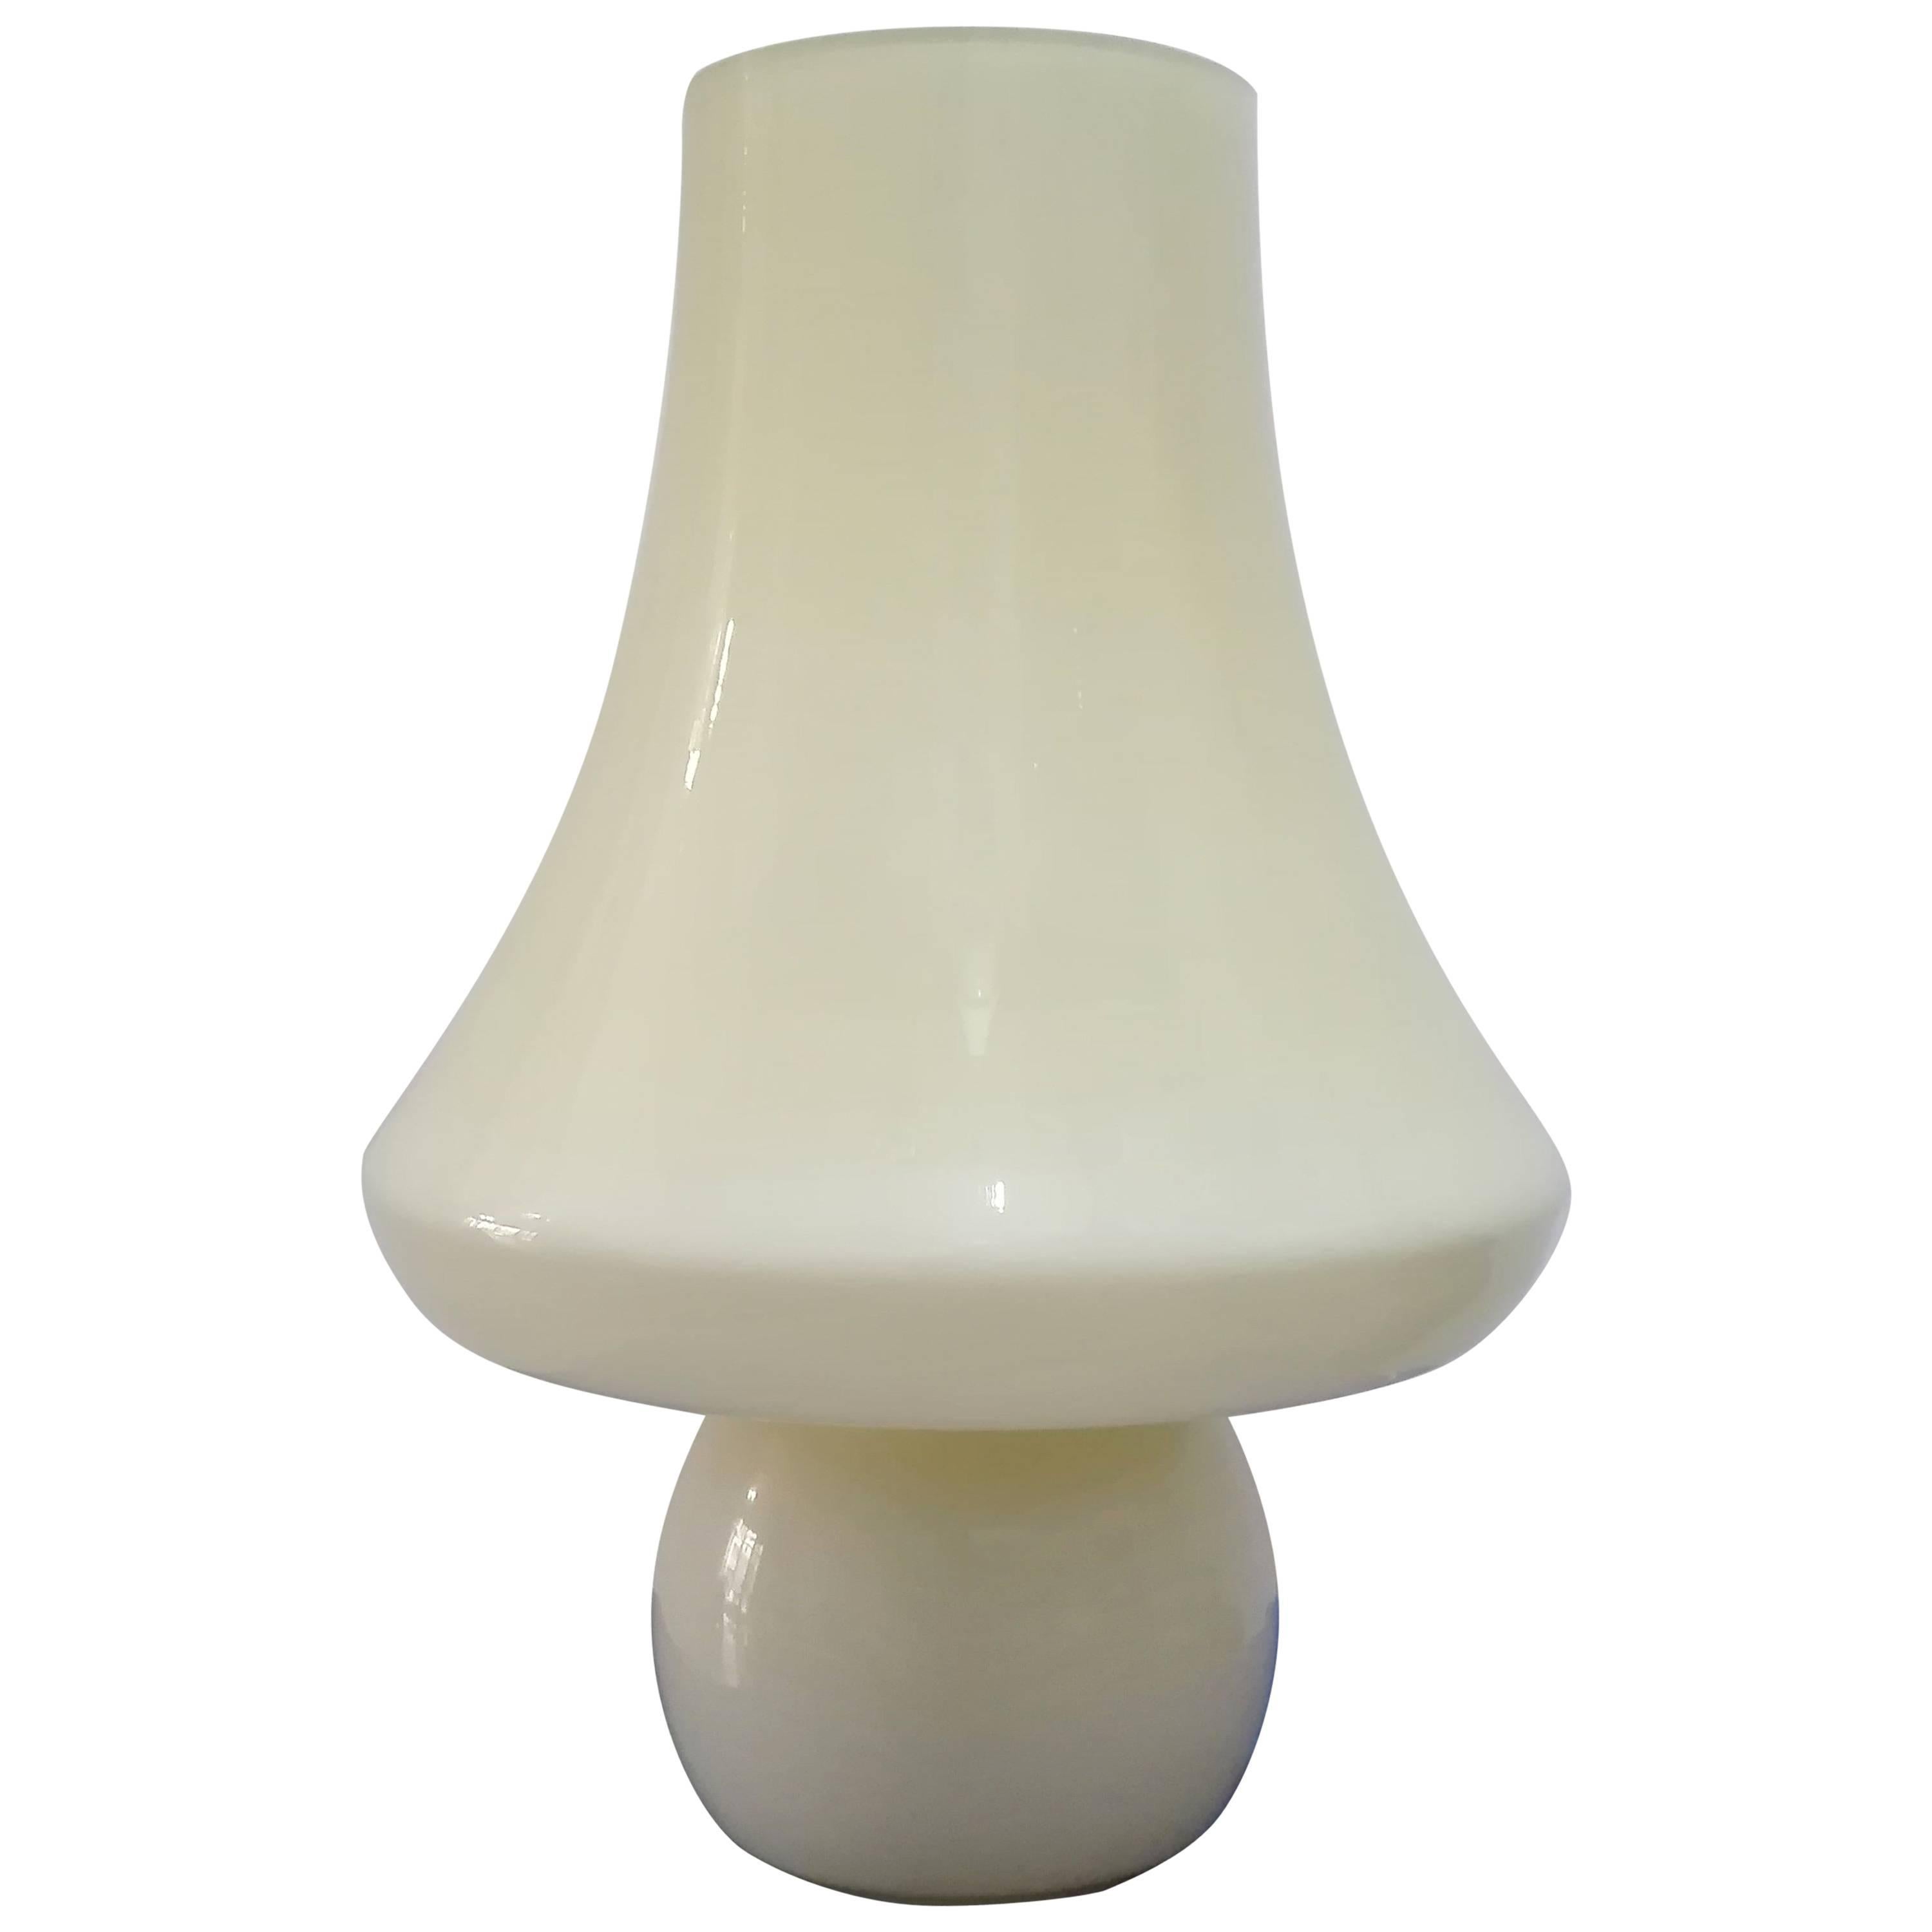 Large Midcentury Mushroom Lamp by Paolo Venini for Venini, 1960s For Sale